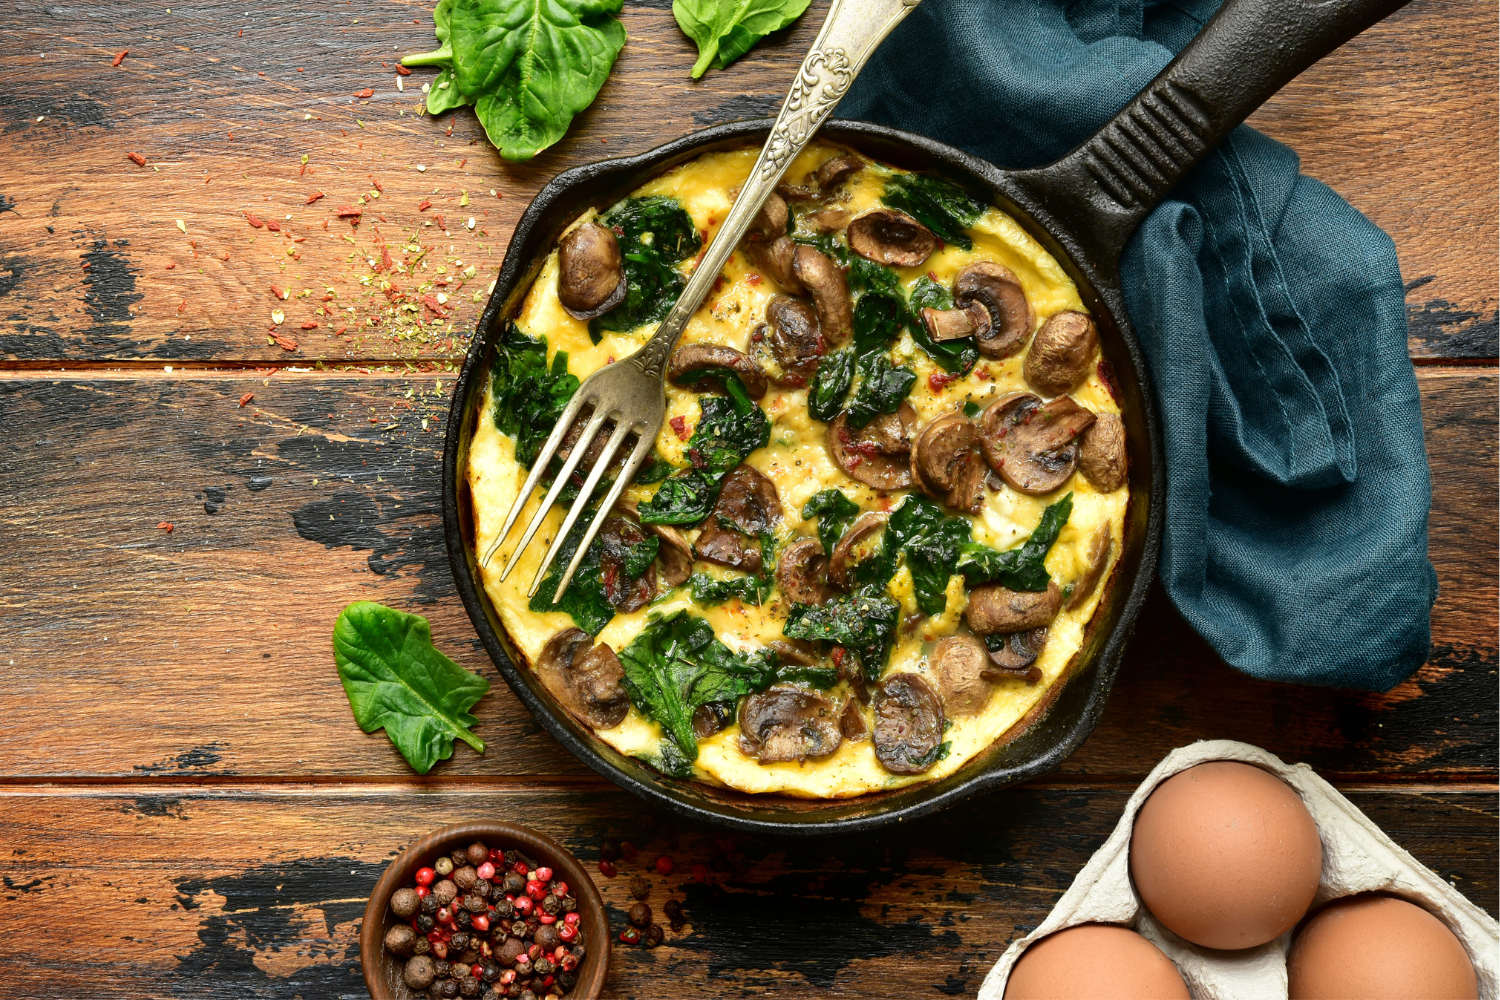 Mushroom, bacon and spinach omelette.